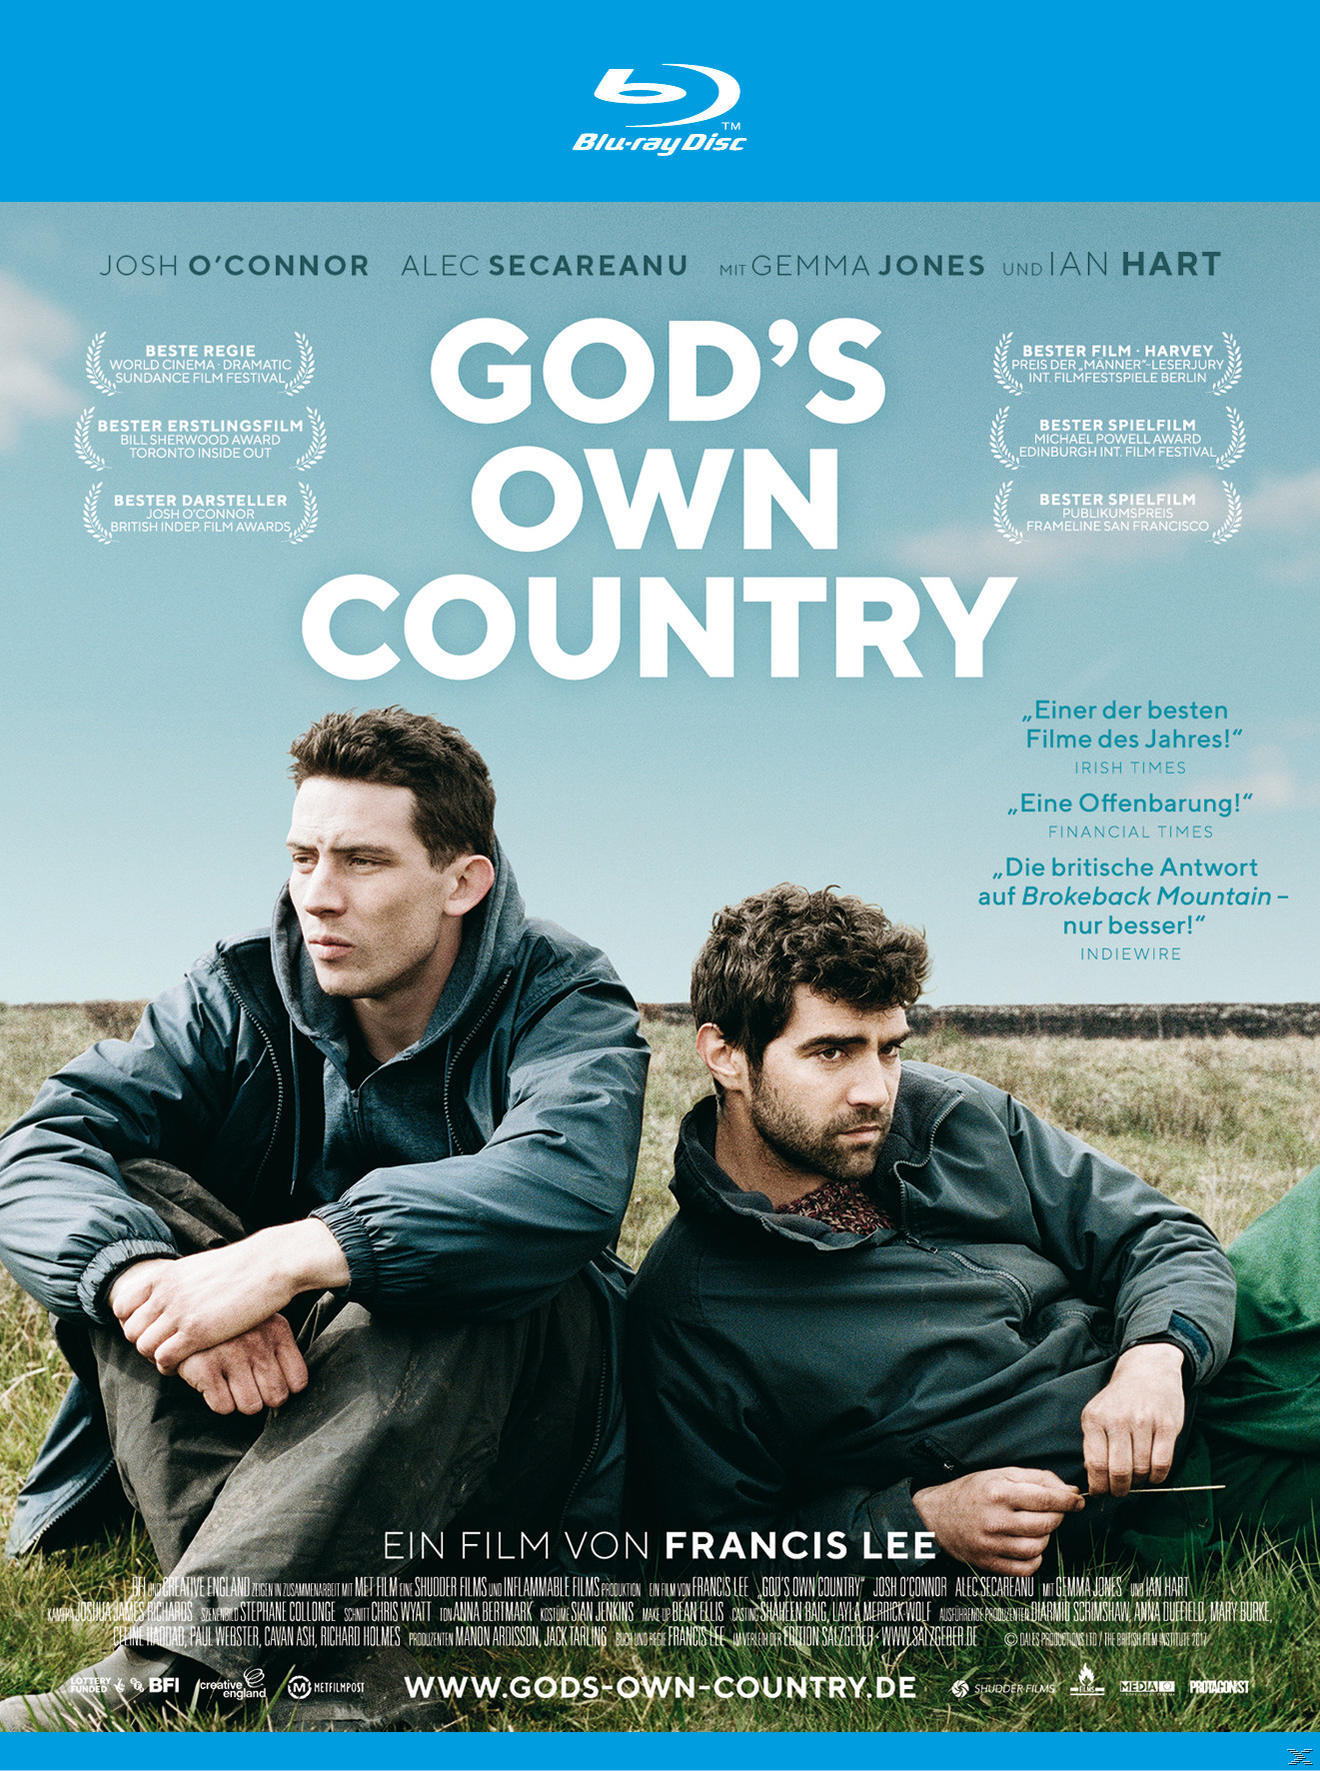 Country Own God’s Blu-ray